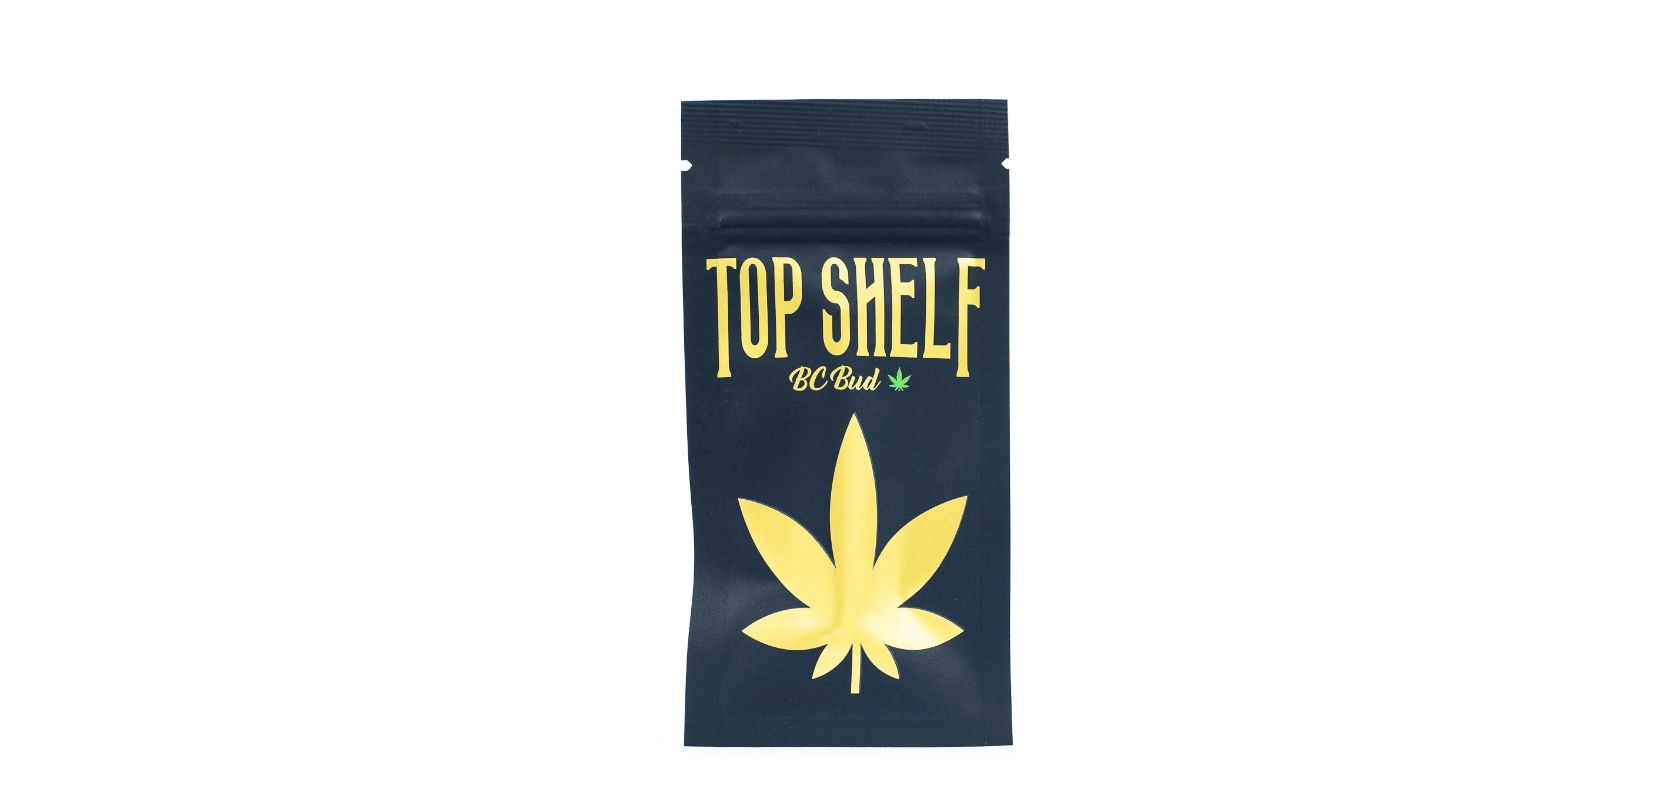 You've probably heard of top shelf BC bud pre rolls and premium strains - but what makes them so special? Is it the flavour and the aroma?